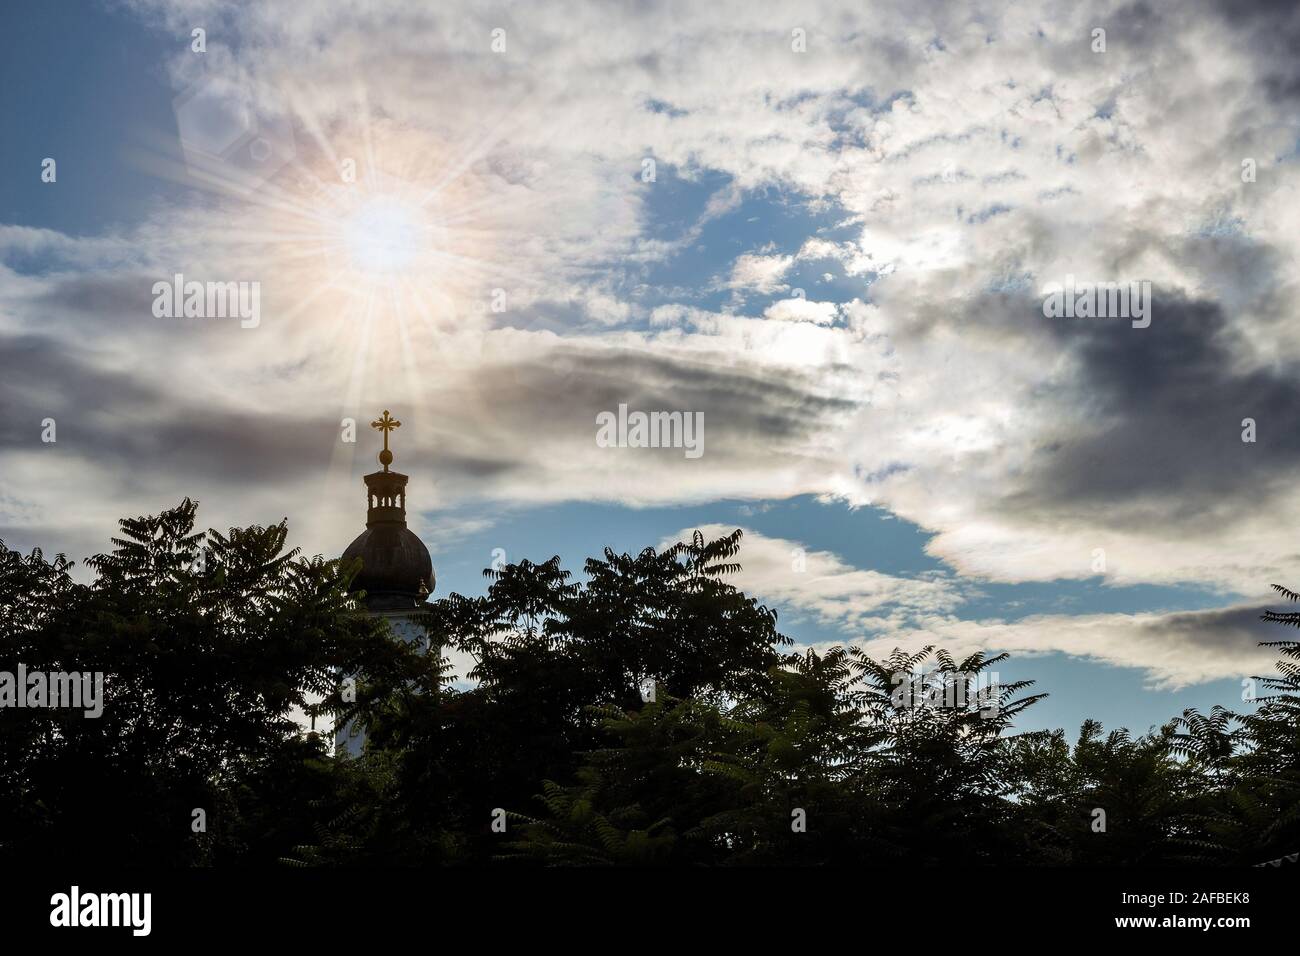 Church and trees silhouettes with sun rays during a hot summer day. Stock Photo